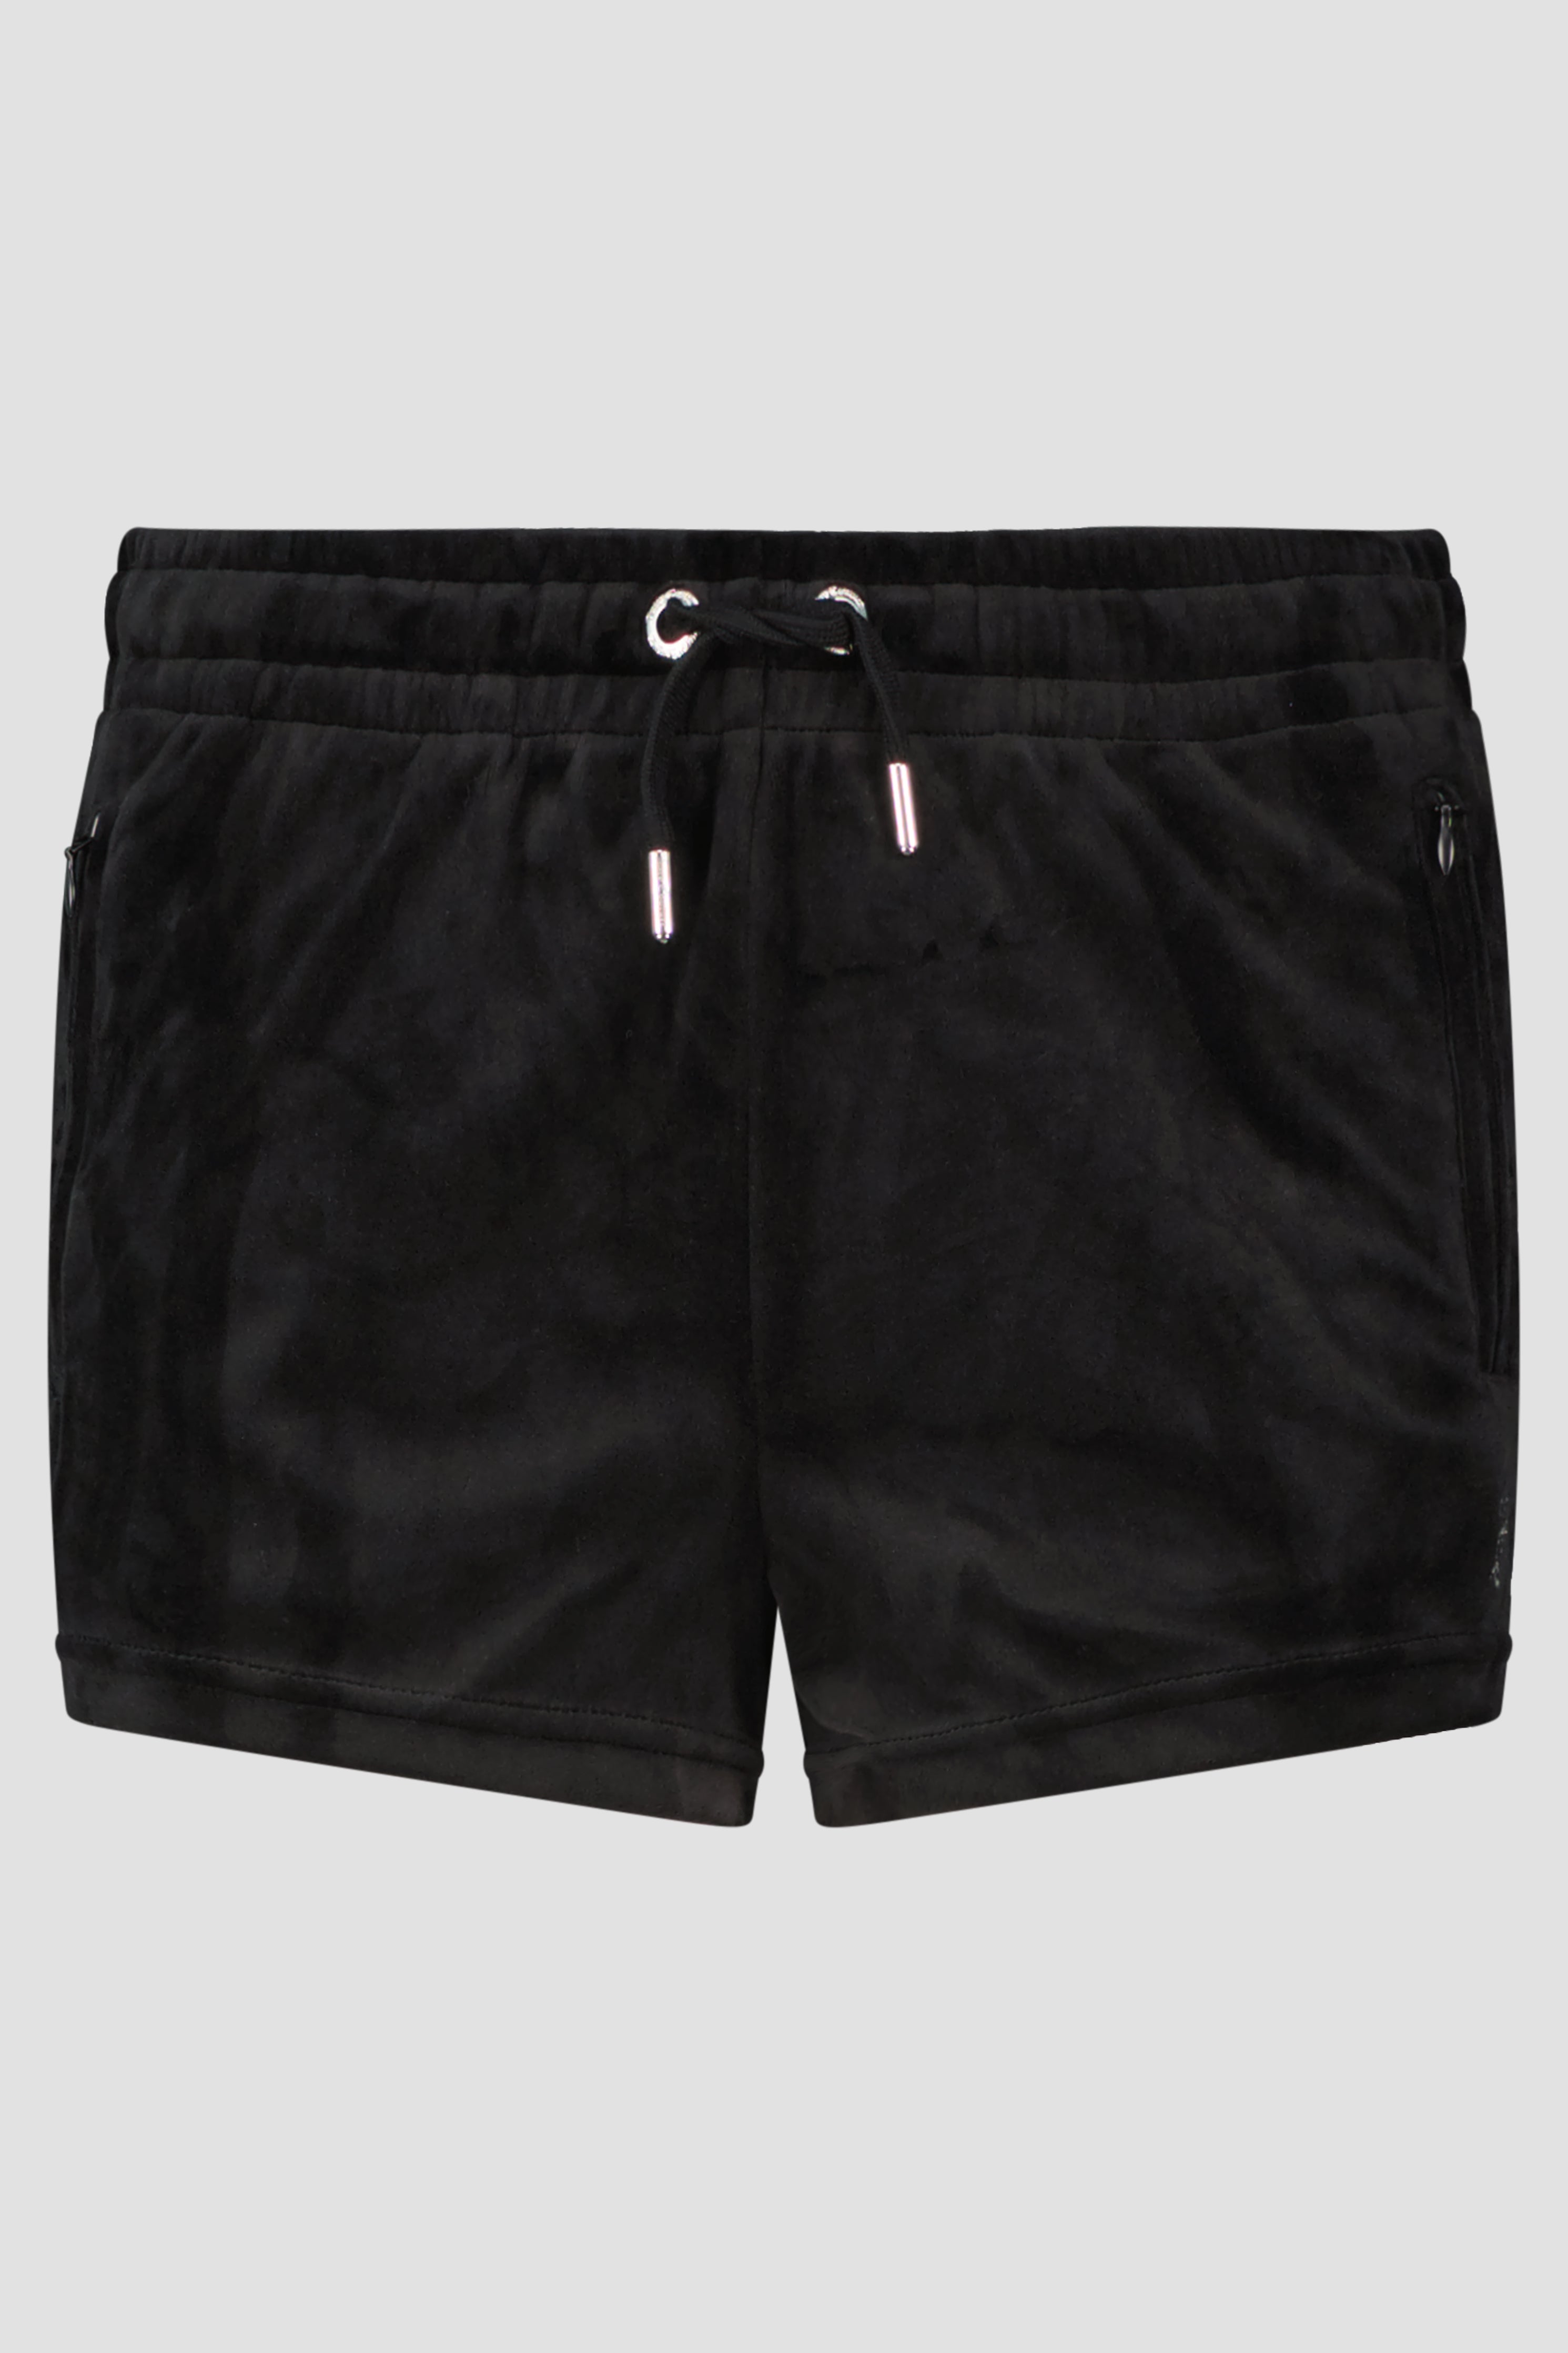 Women's Juicy Couture Black Tamia Shorts